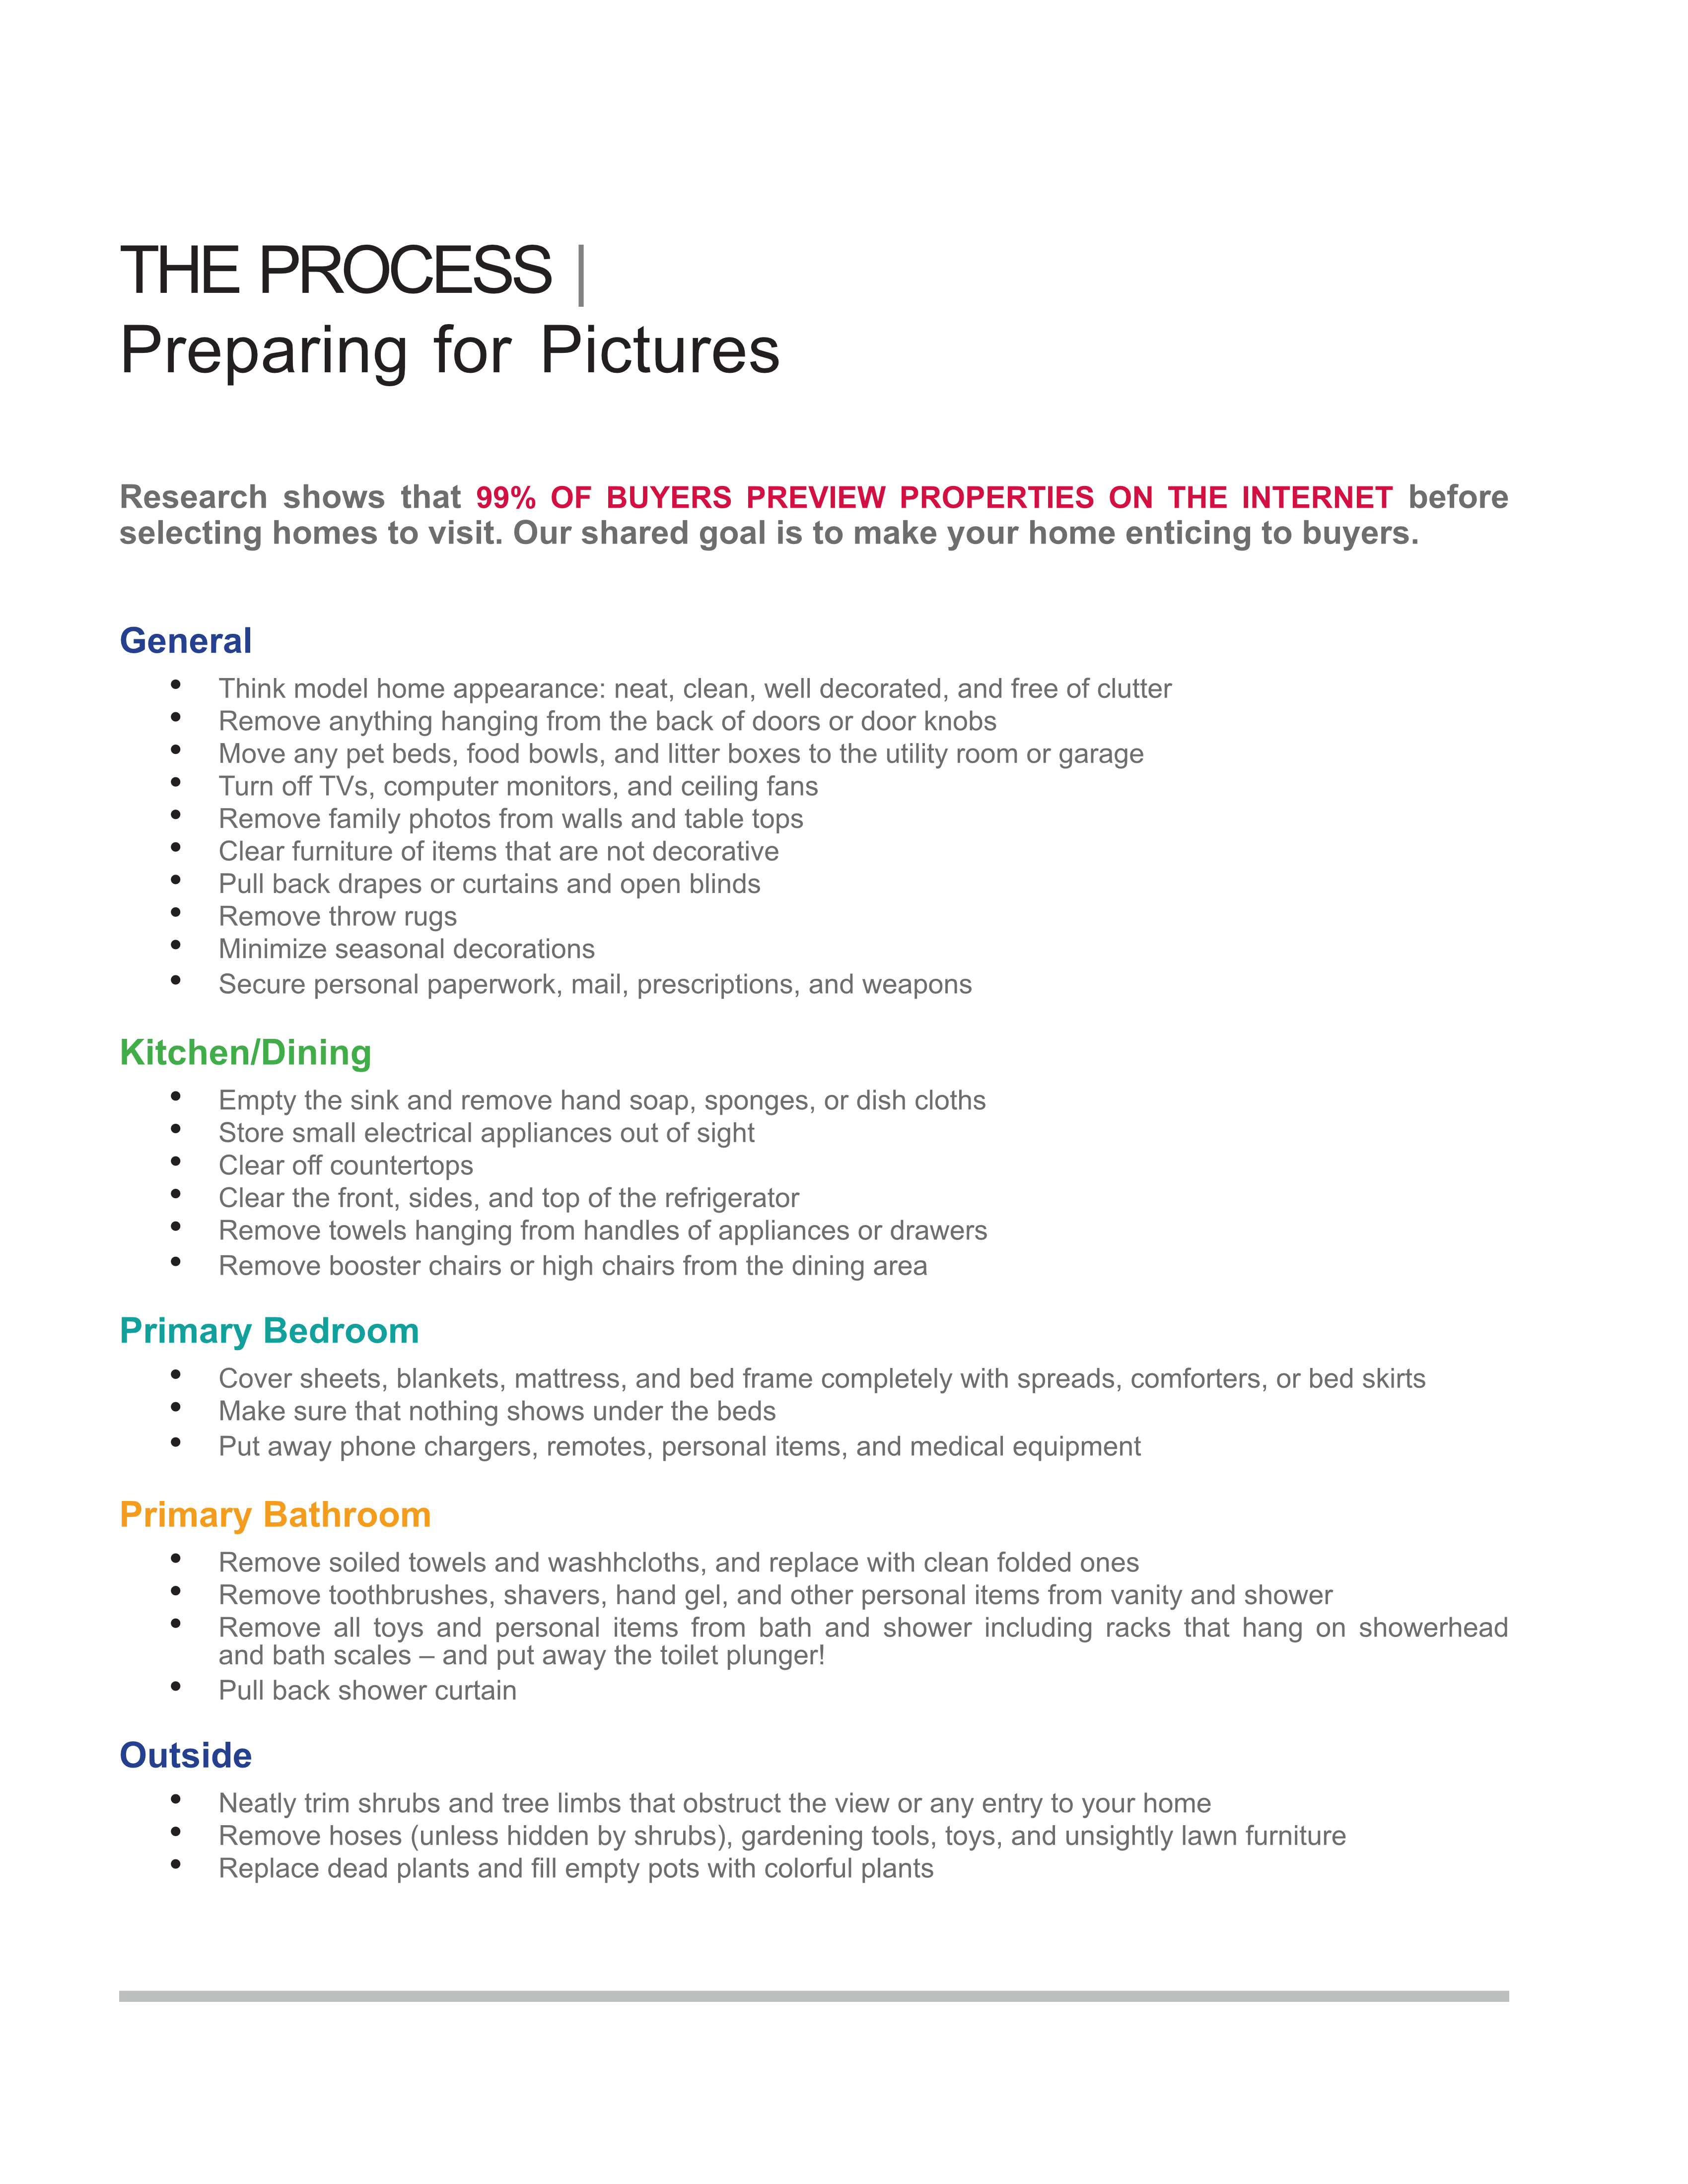 The Selling Process2-Preparing for Pictures